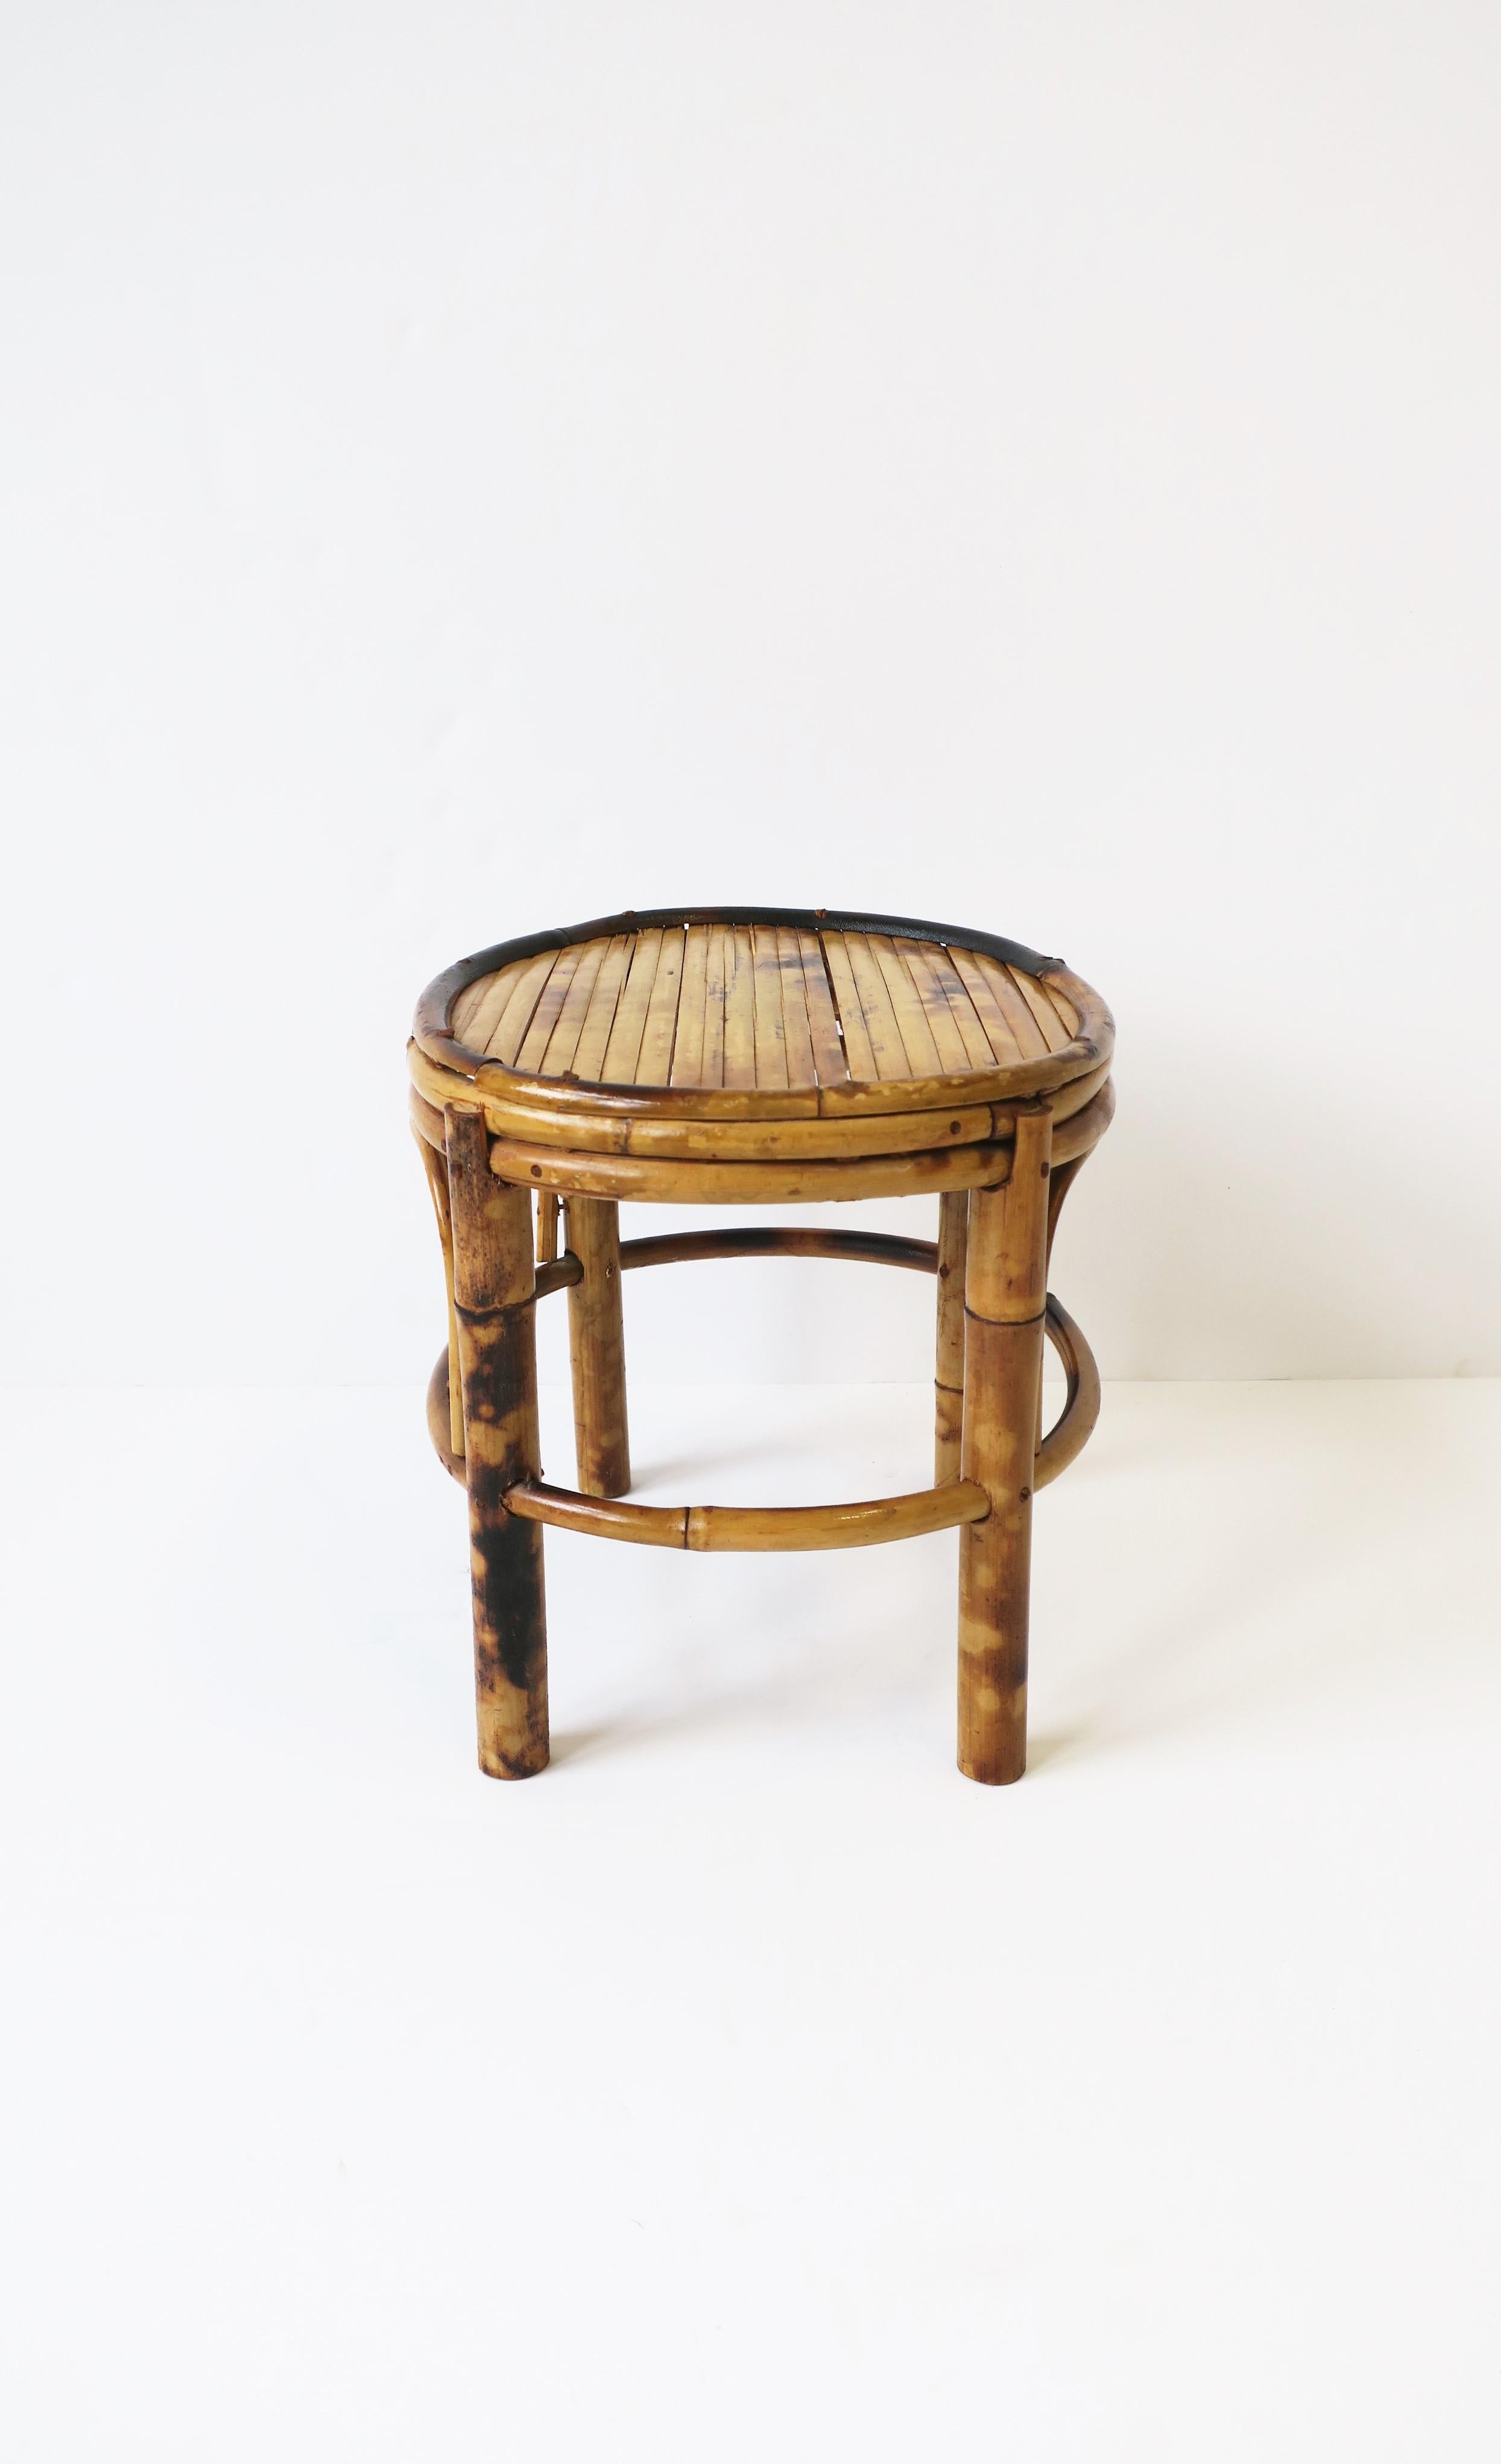 Wicker Bamboo Table or Plant Stand, Small For Sale 3